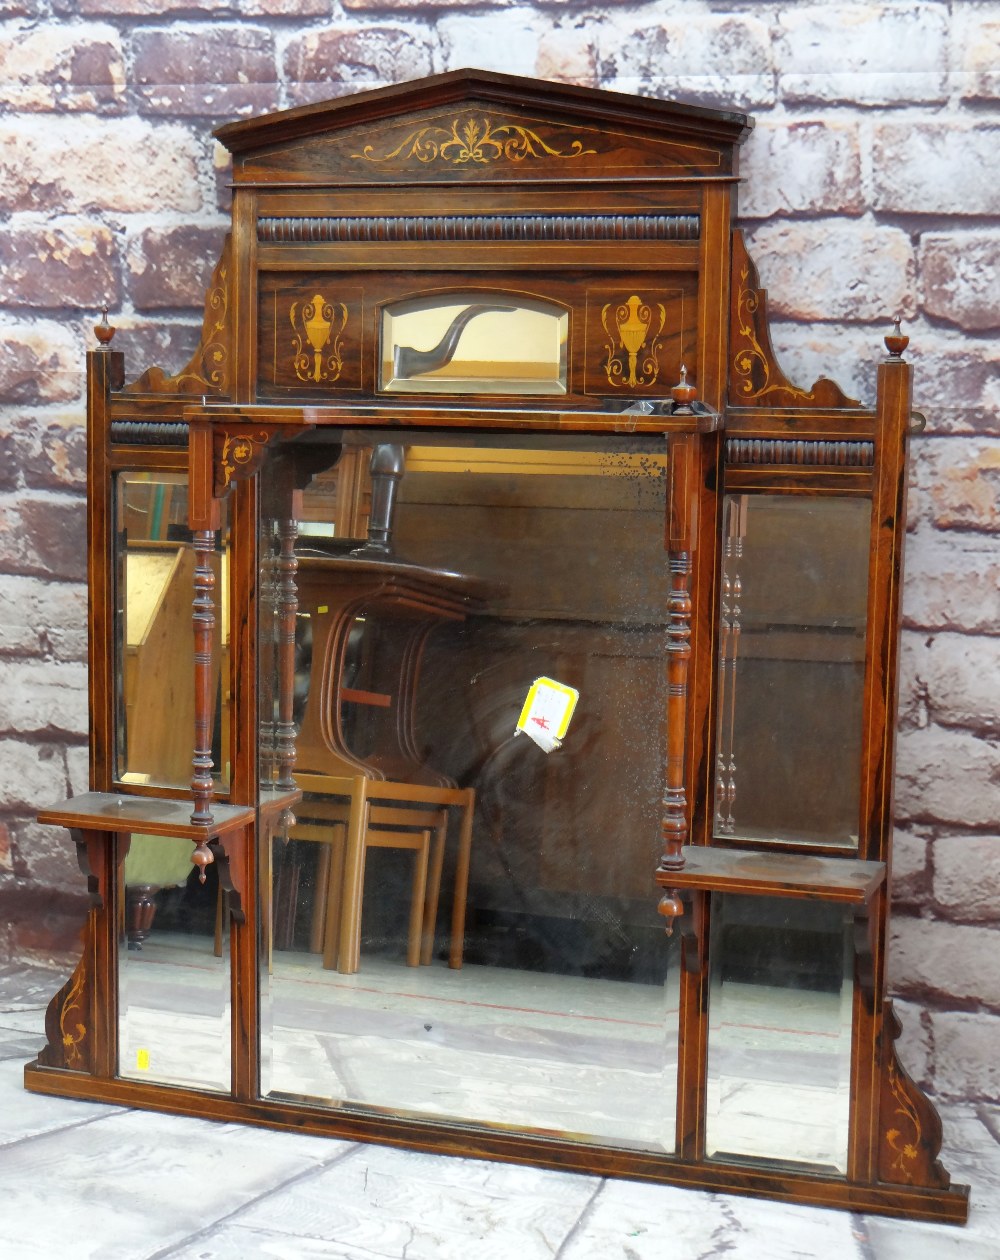 EDWARDIAN ROSEWOOD MARQUETRY ARCHITECTURAL MIRROR, with multiple bevelled plates, turned uprights